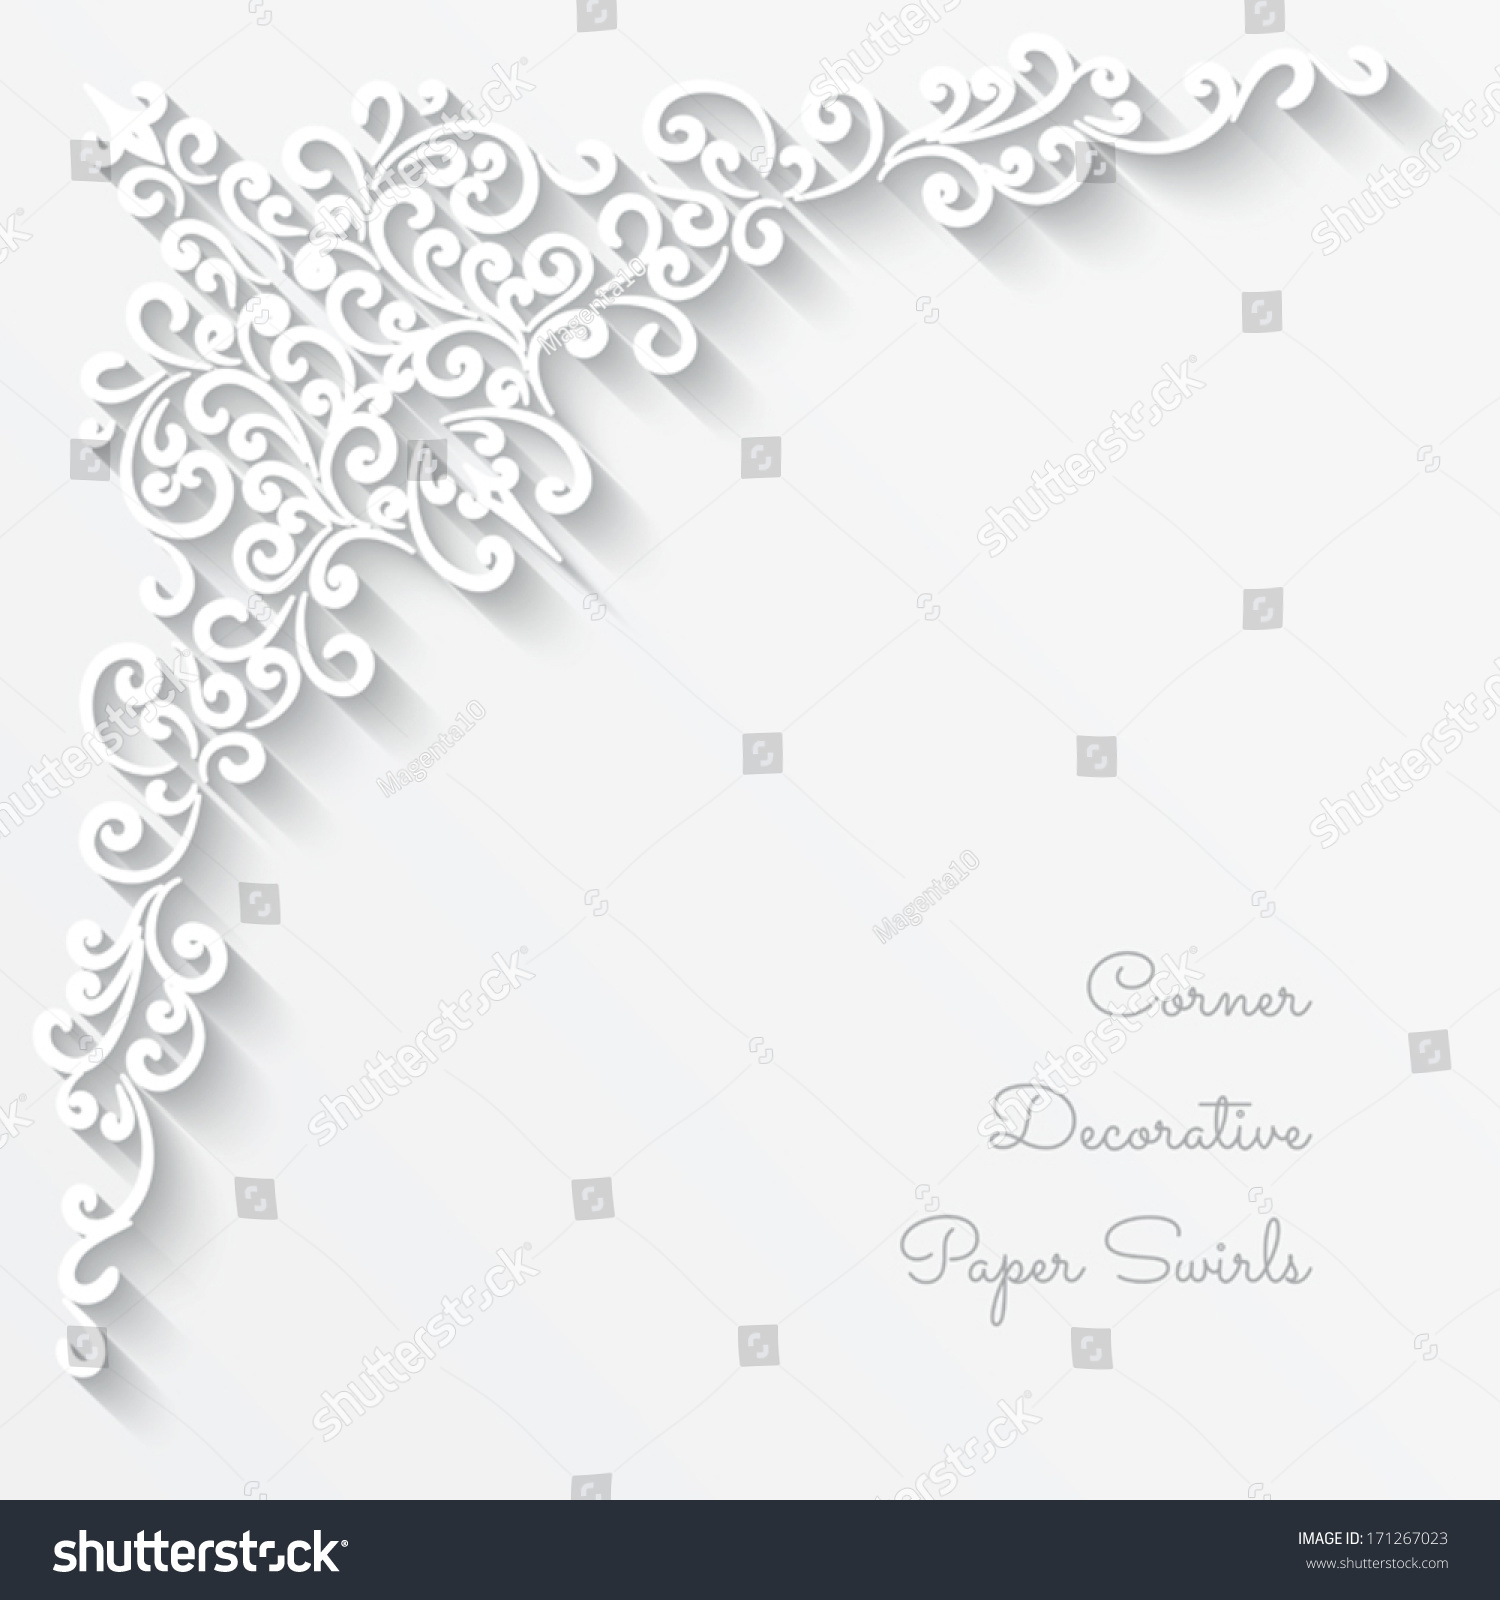 Abstract Background Corner Decoration With Paper Swirls Vector Eps10